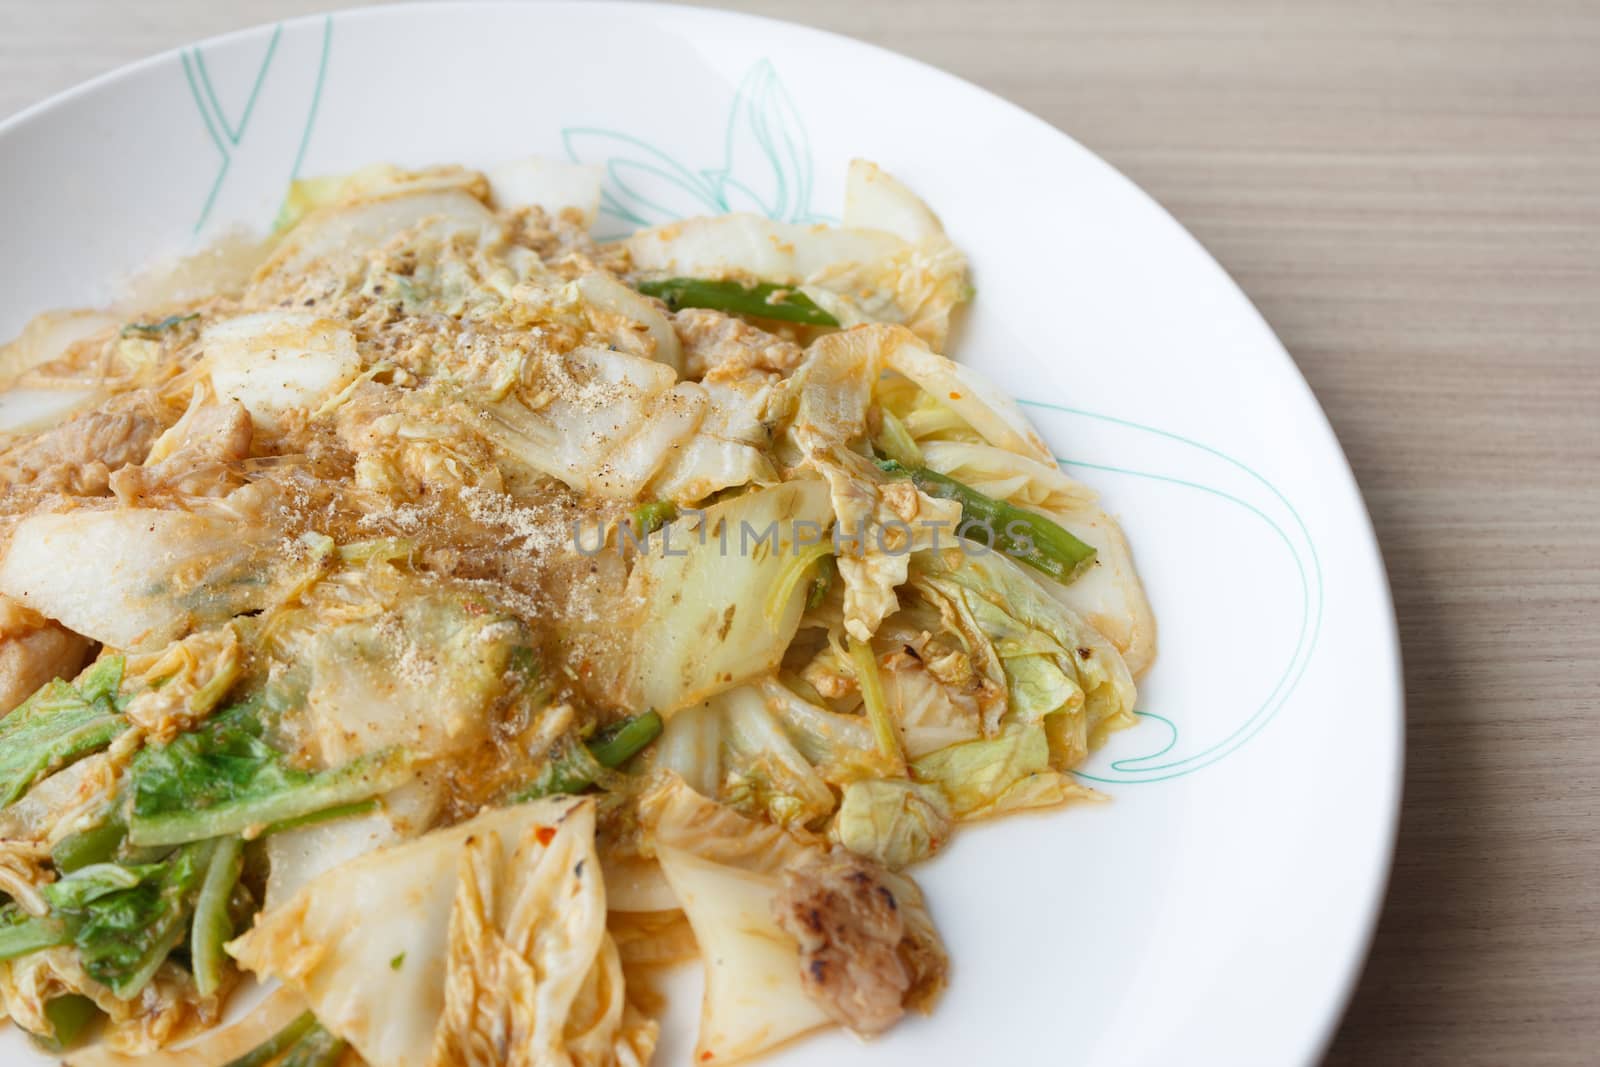 Suki dry fried vermicelli with cabbage and pork